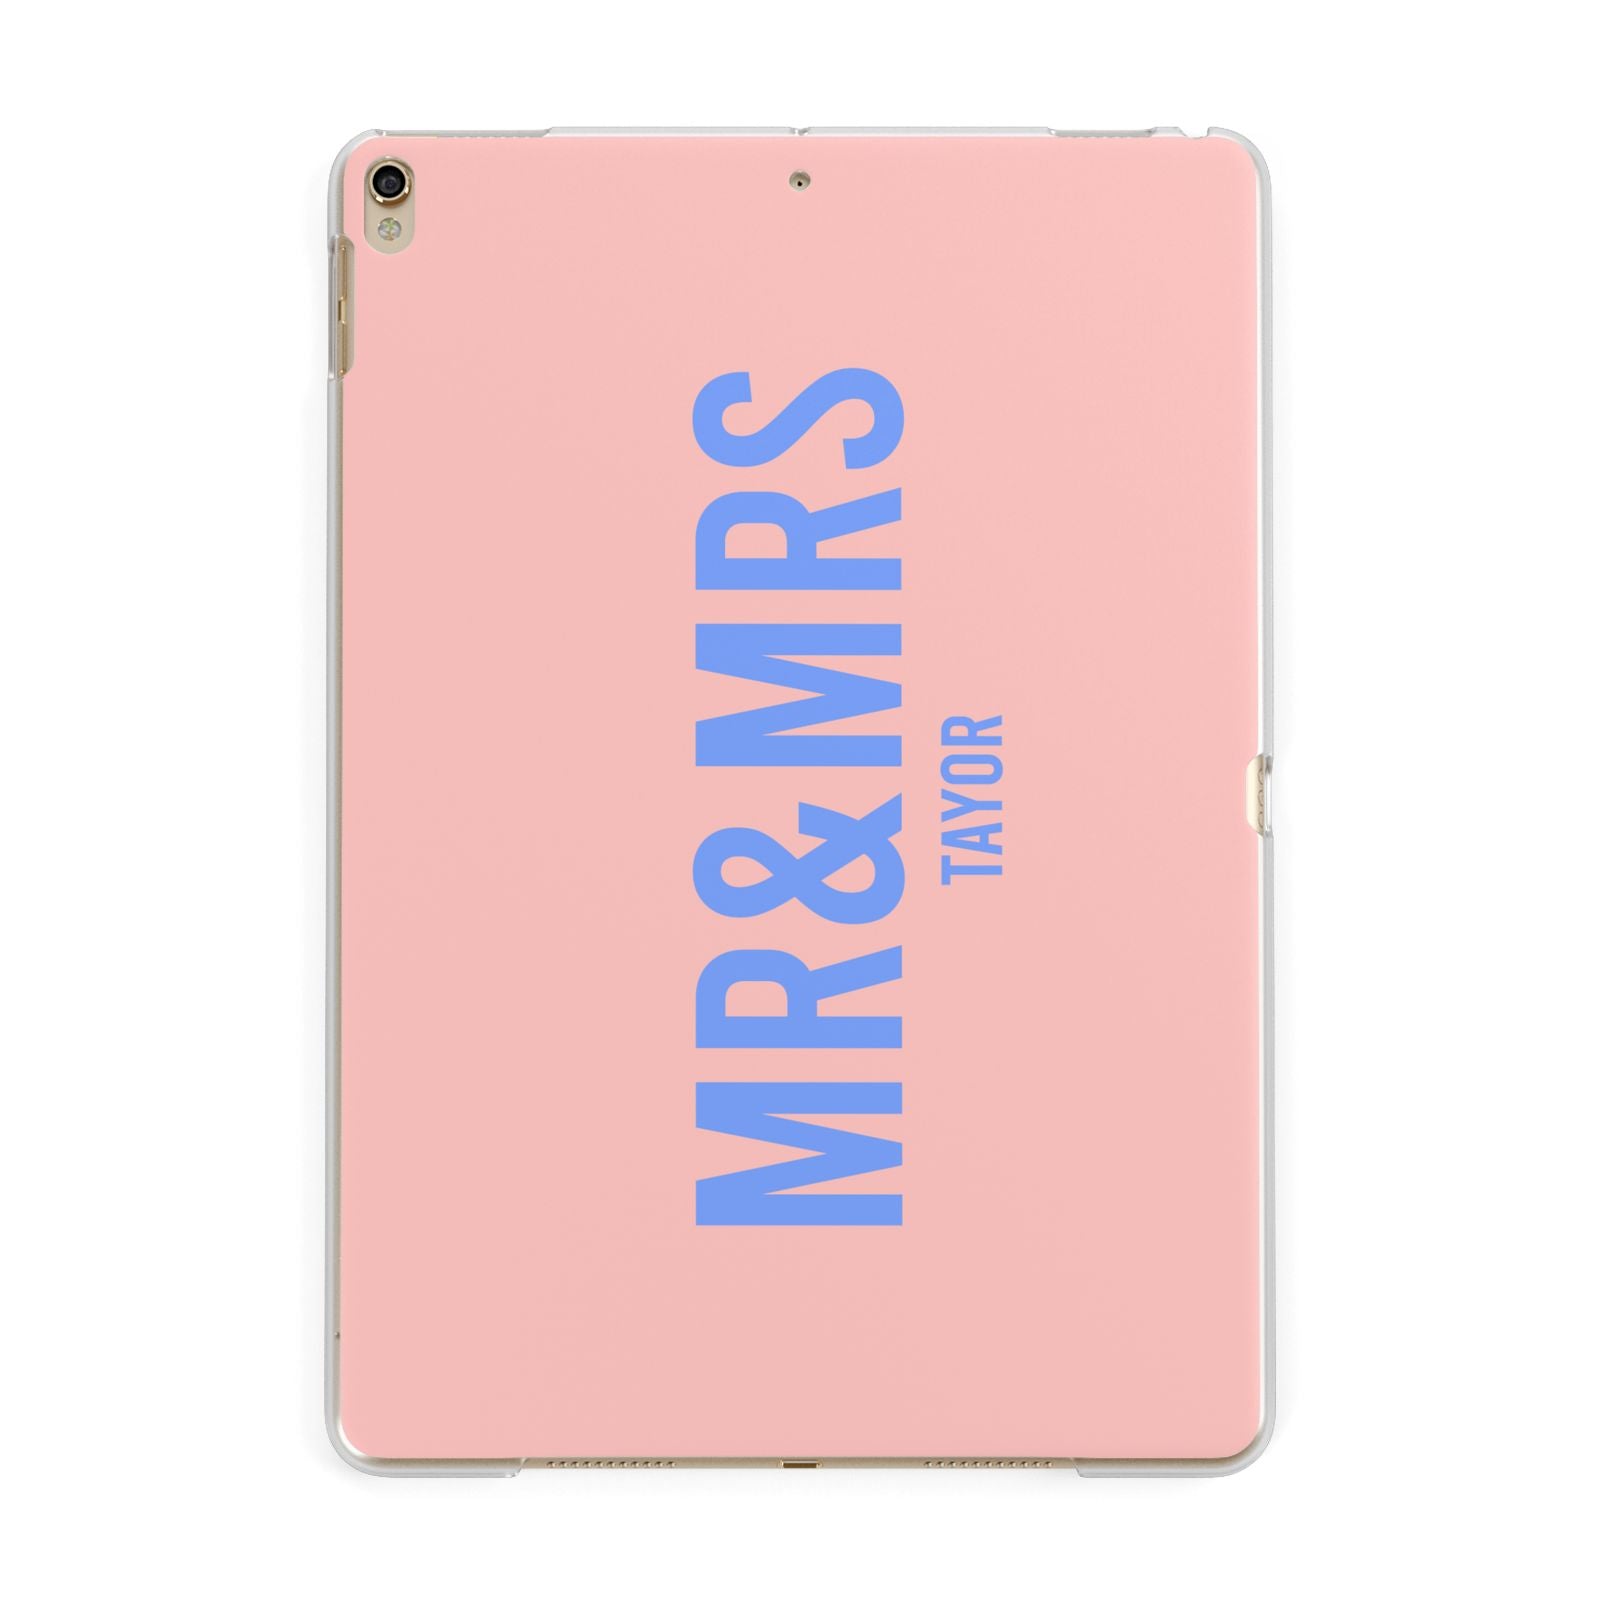 Personalised Mr and Mrs Apple iPad Gold Case